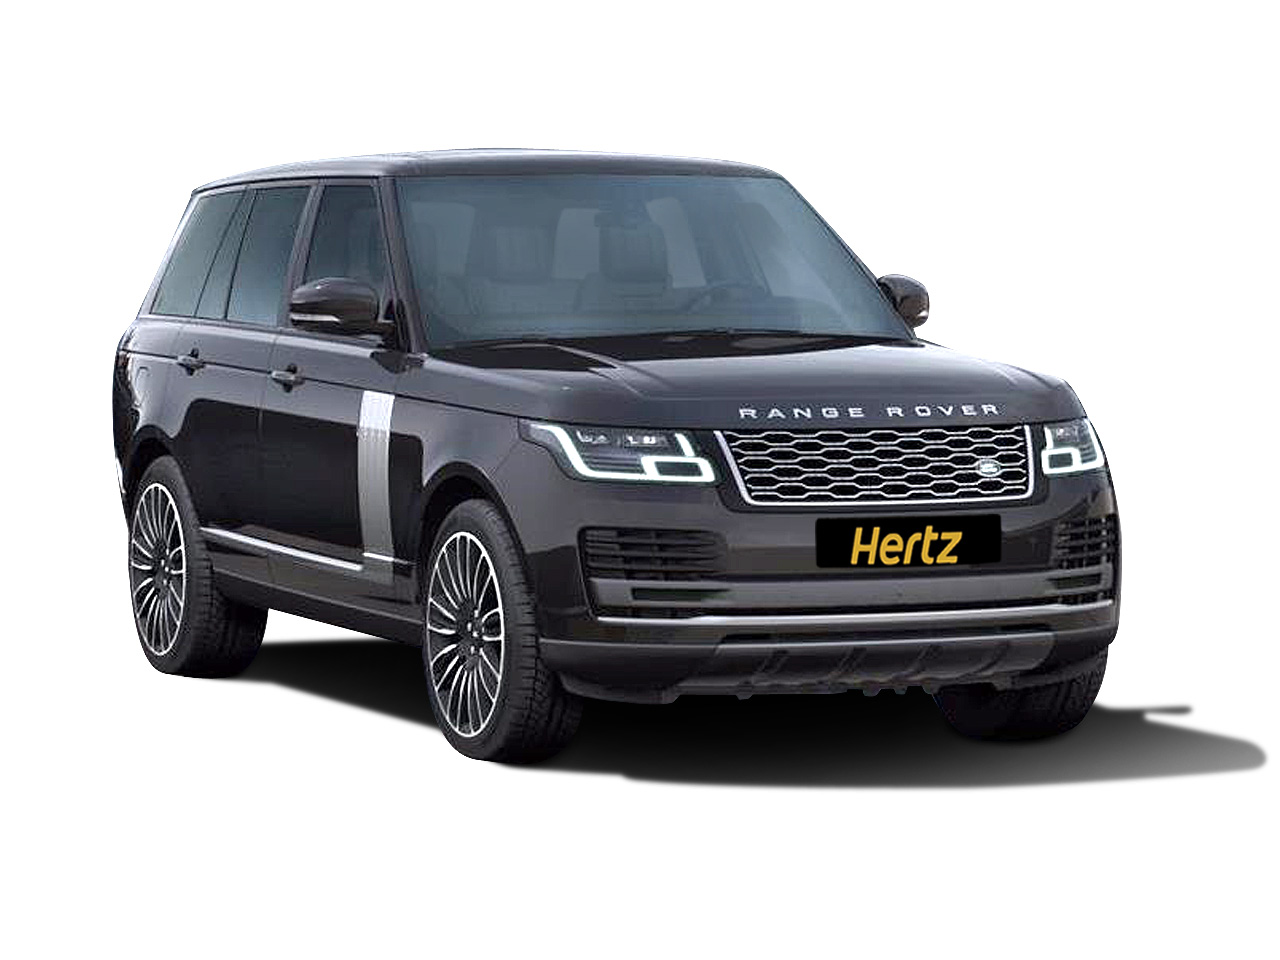 Range Rover Vogue3.0 Supercharged (NEW 2018) car for hire